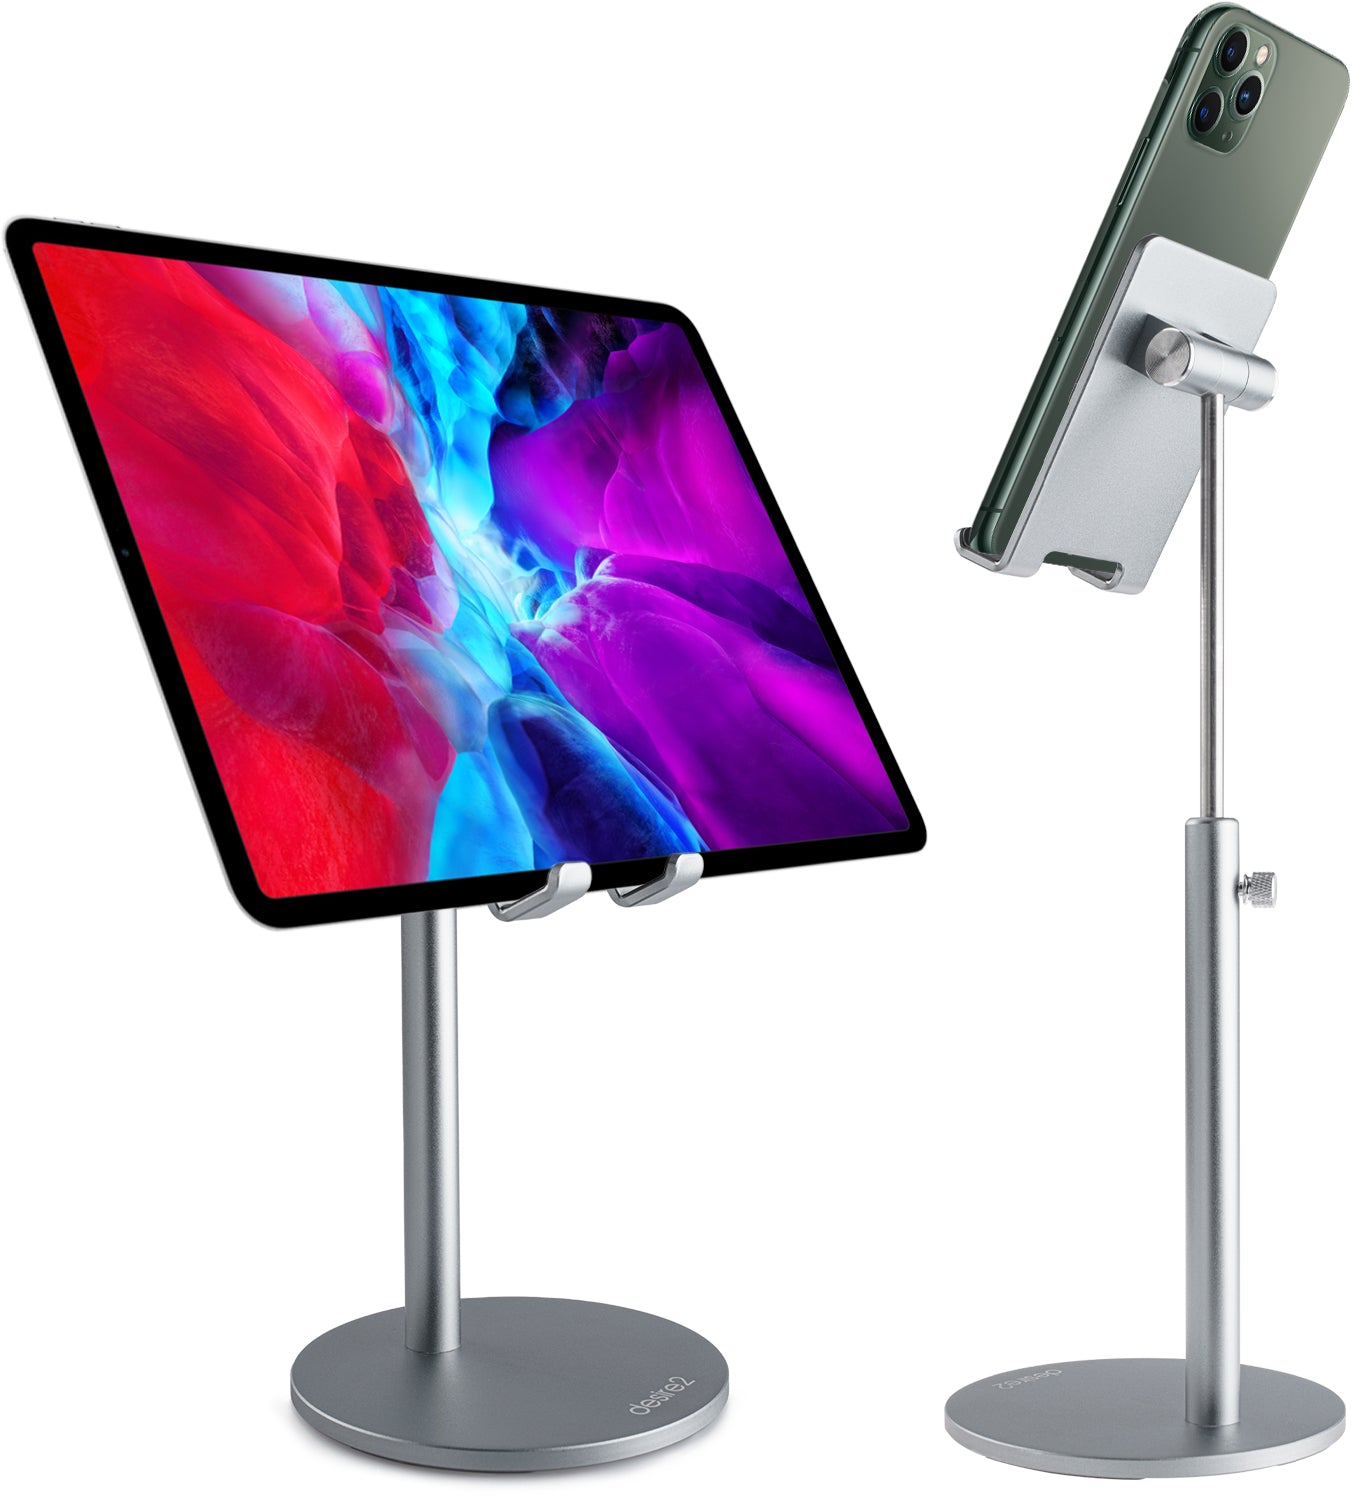 Aluminium phone and tablet stand shown in dual image with ipad tablet shown from the front and an iphone shown from the rear with the height adjustment set to maximum. 